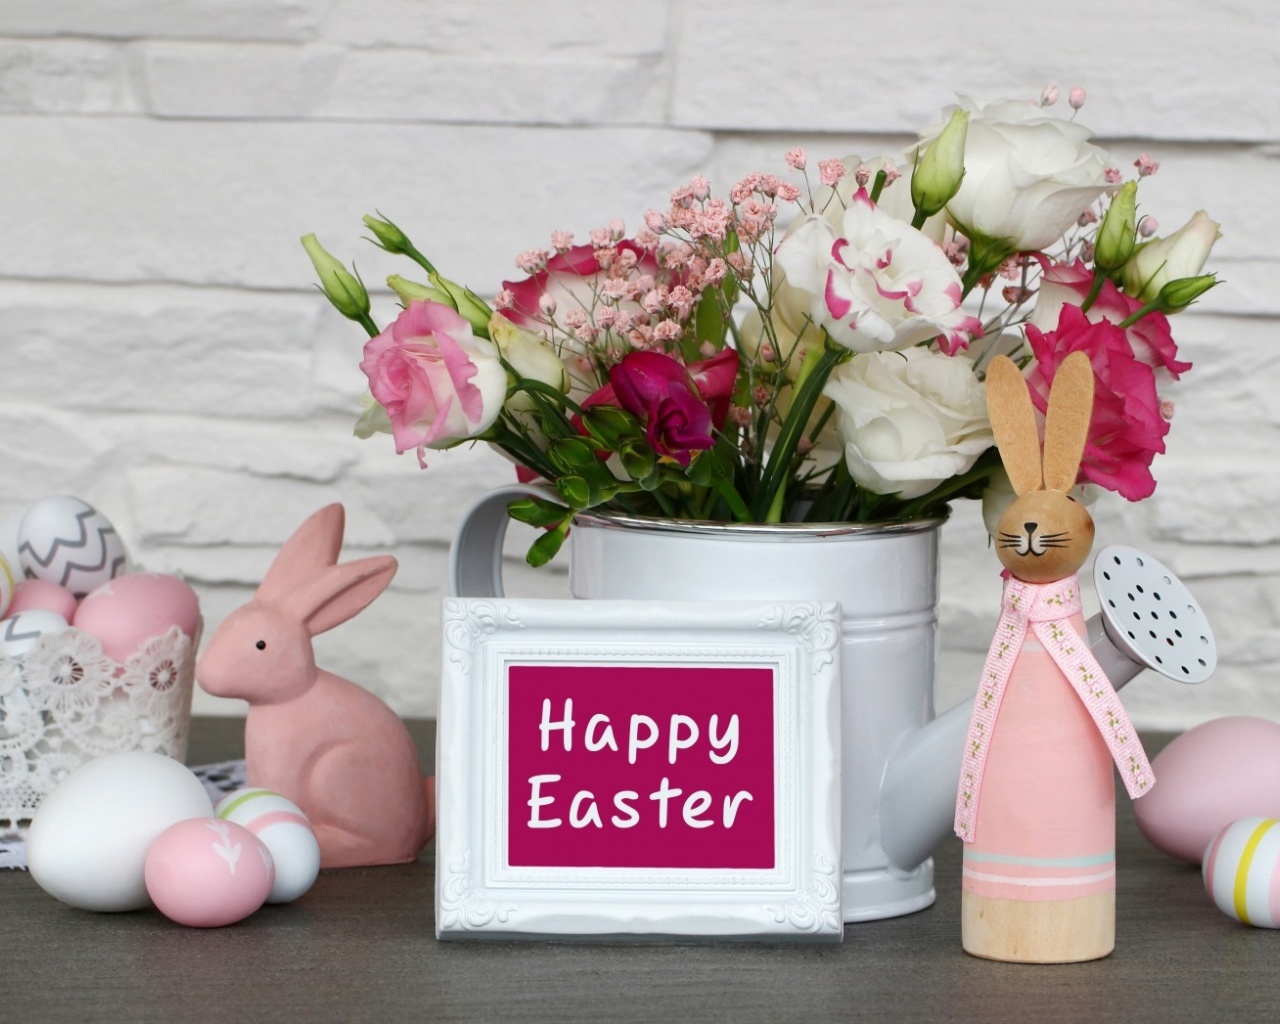 Das Happy Easter with Hare Figures Wallpaper 1280x1024